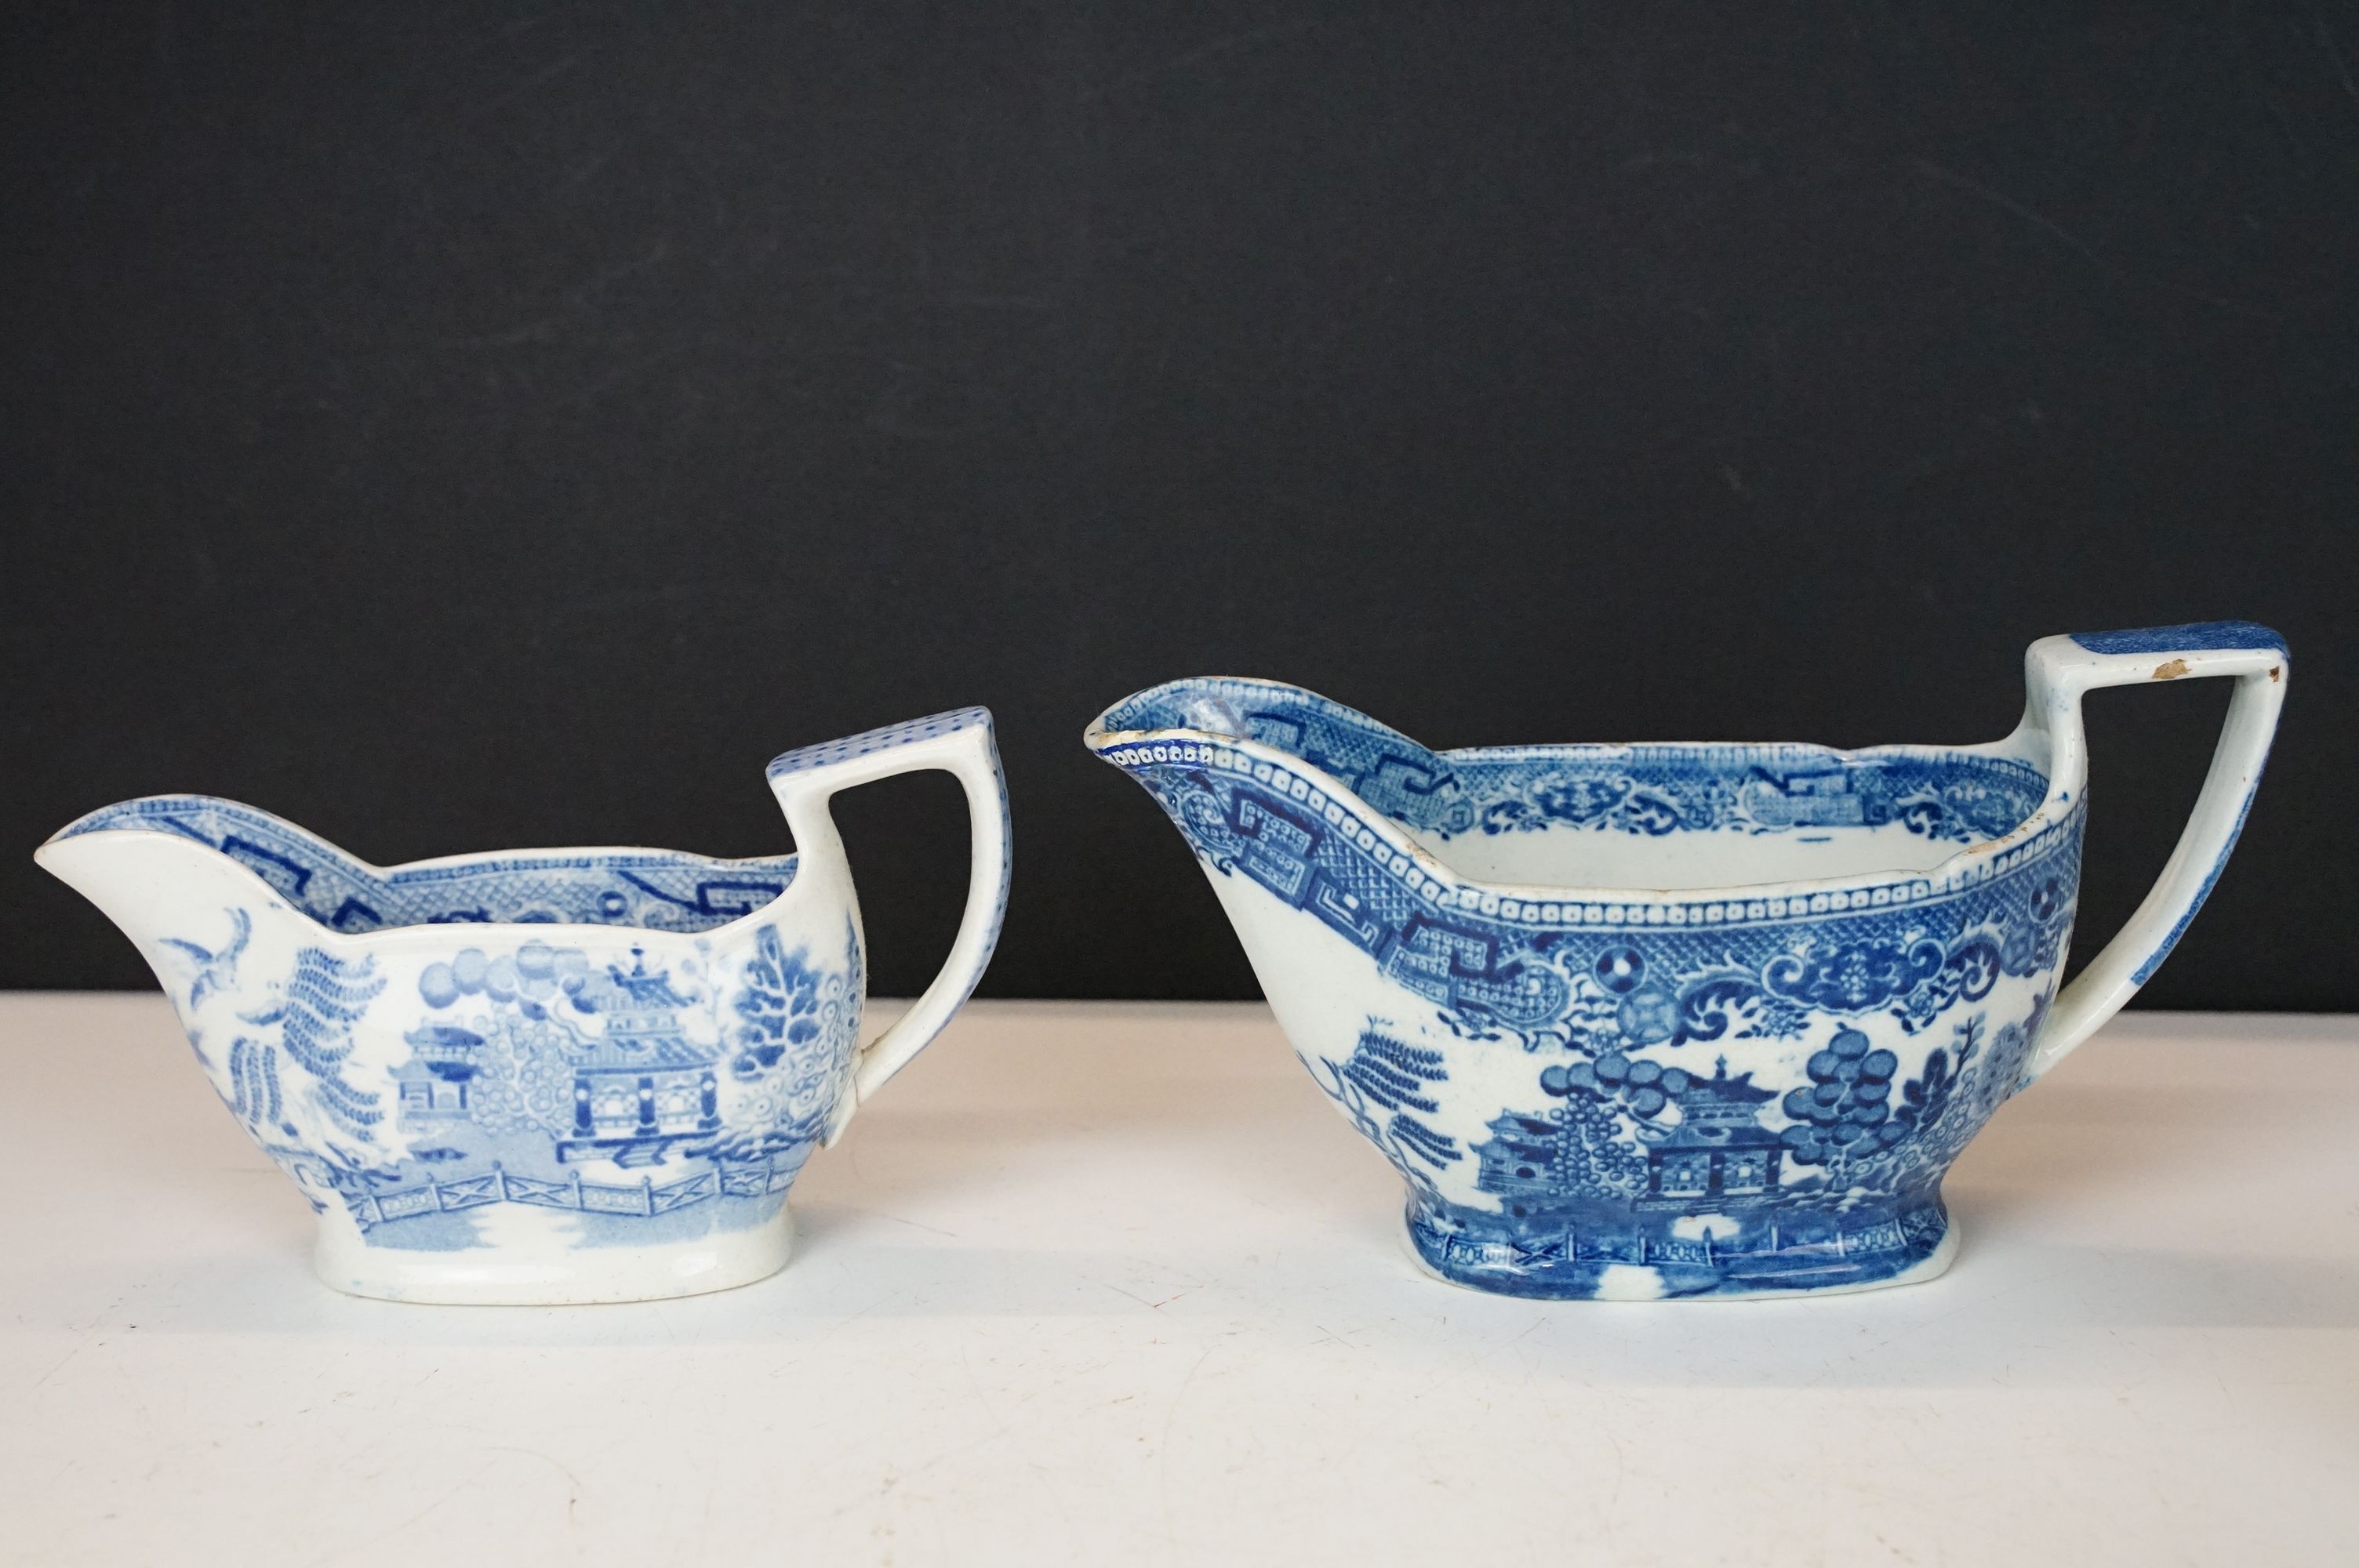 Collection of 19th century blue & white English porcelain, featuring early 19th C examples, to - Image 6 of 13